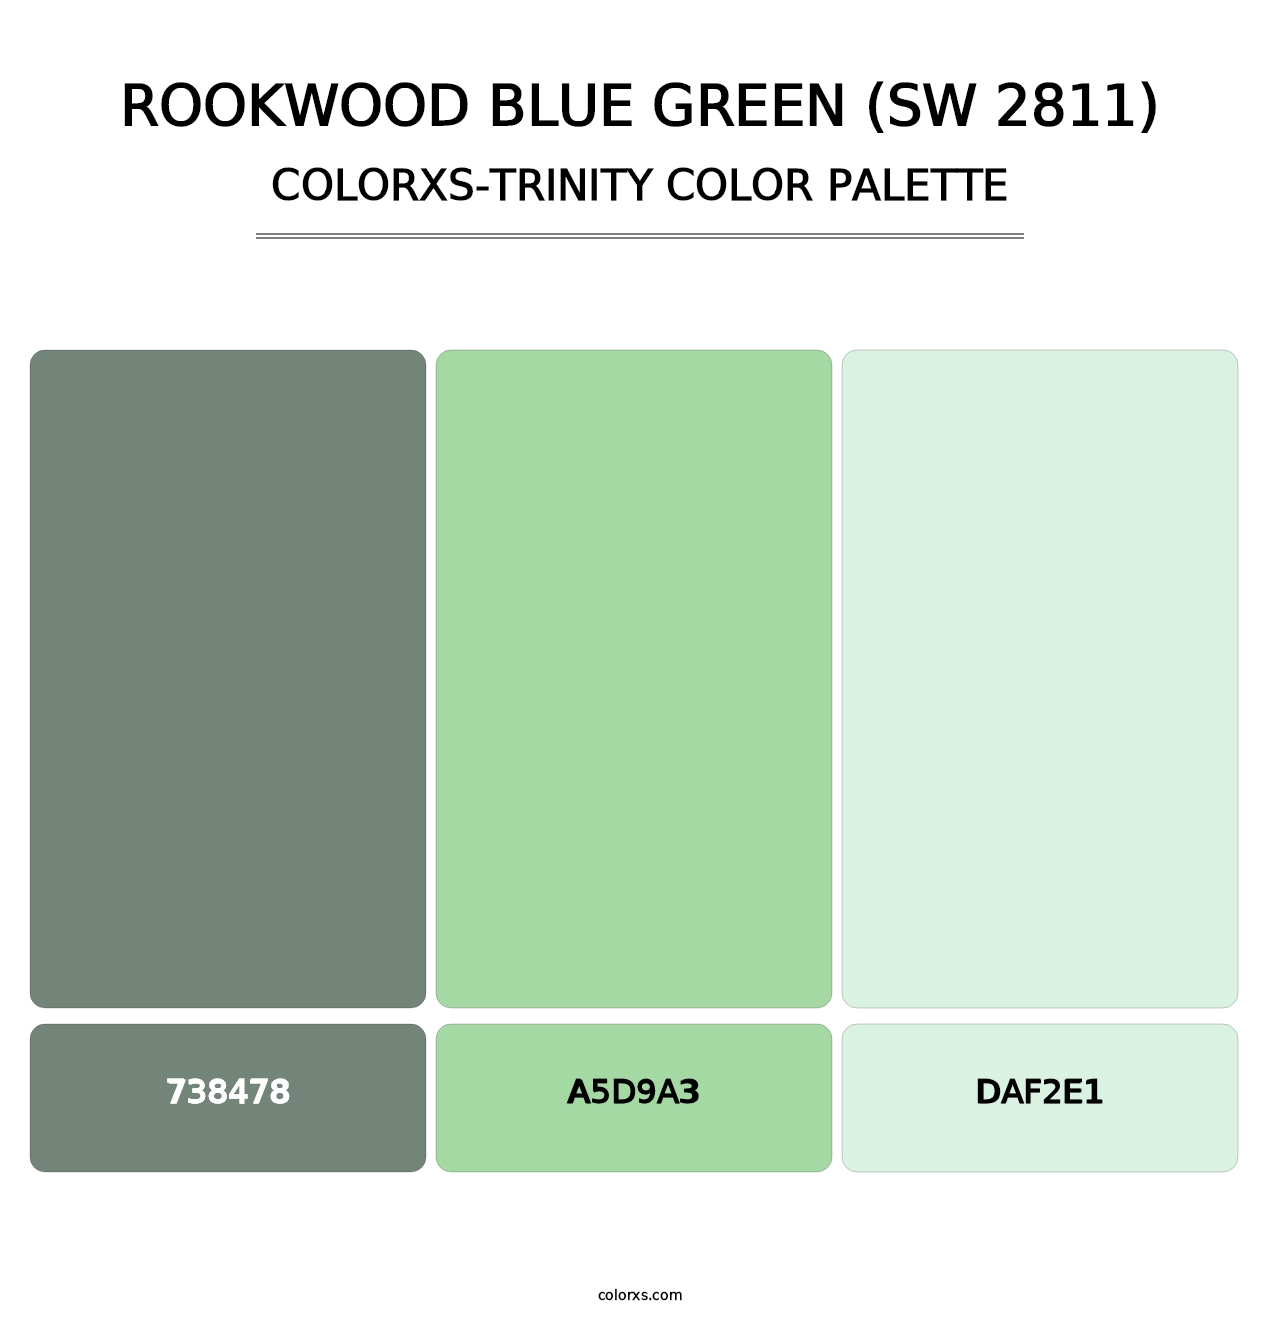 Rookwood Blue Green (SW 2811) - Colorxs Trinity Palette